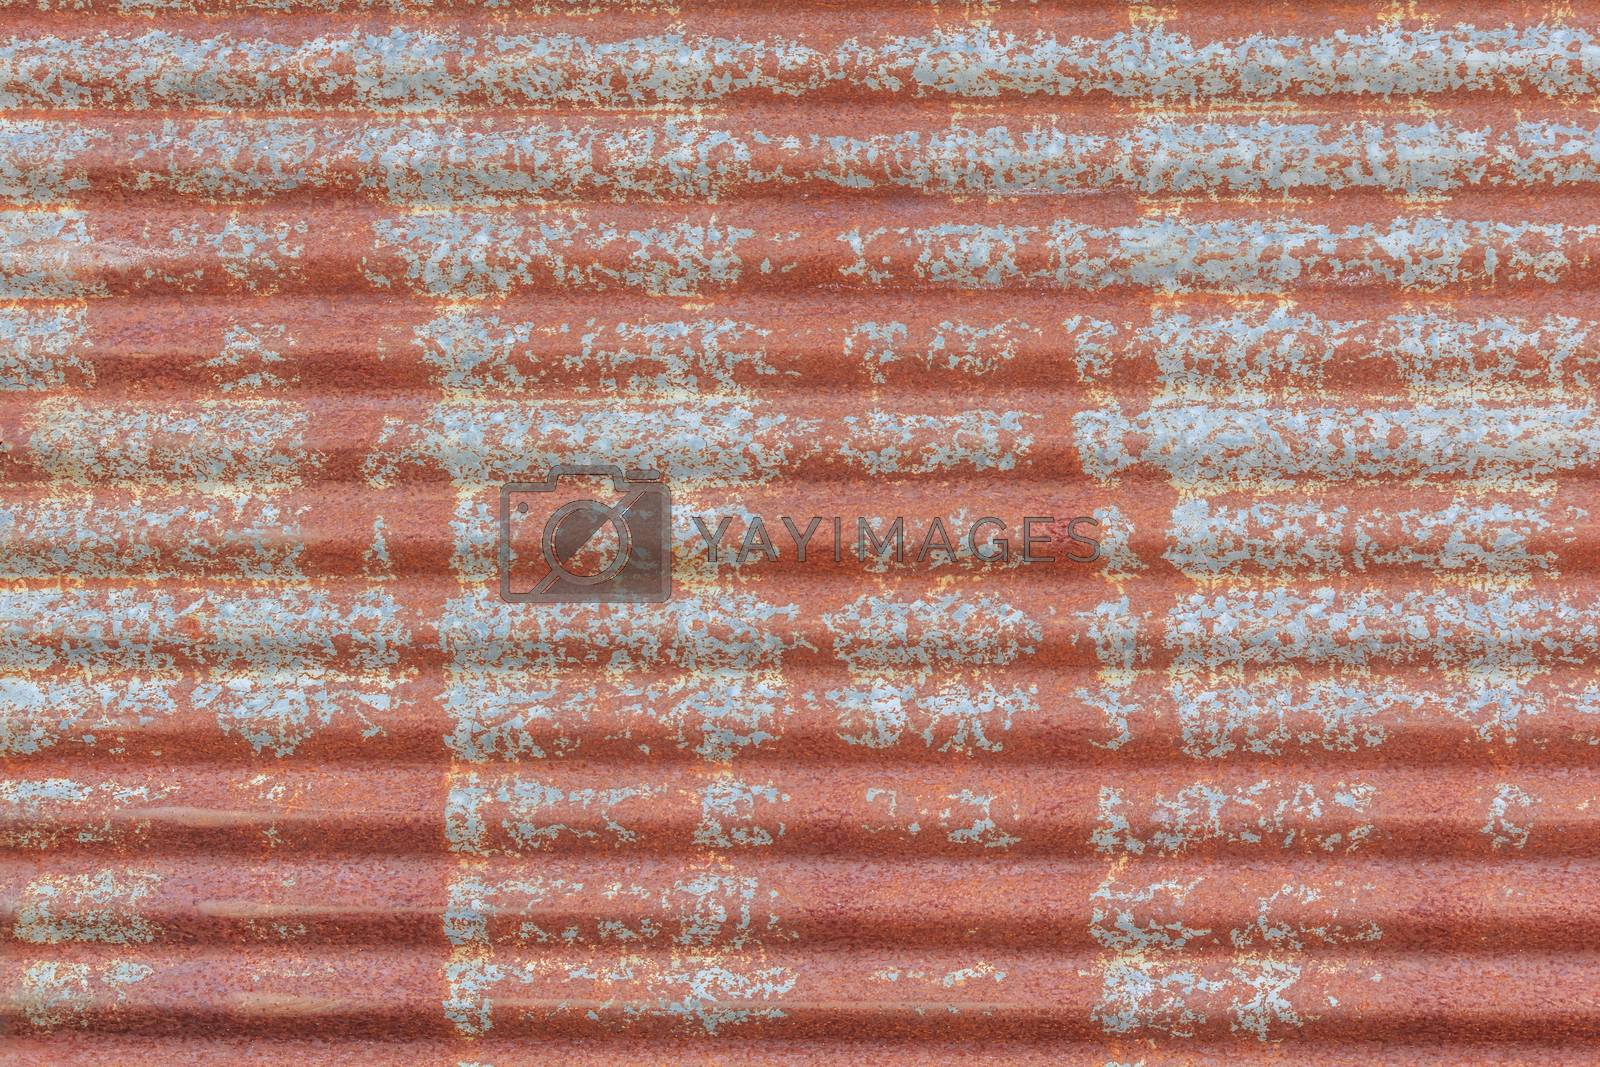 Royalty free image of Rusted galvanized iron plate  by yeekazar